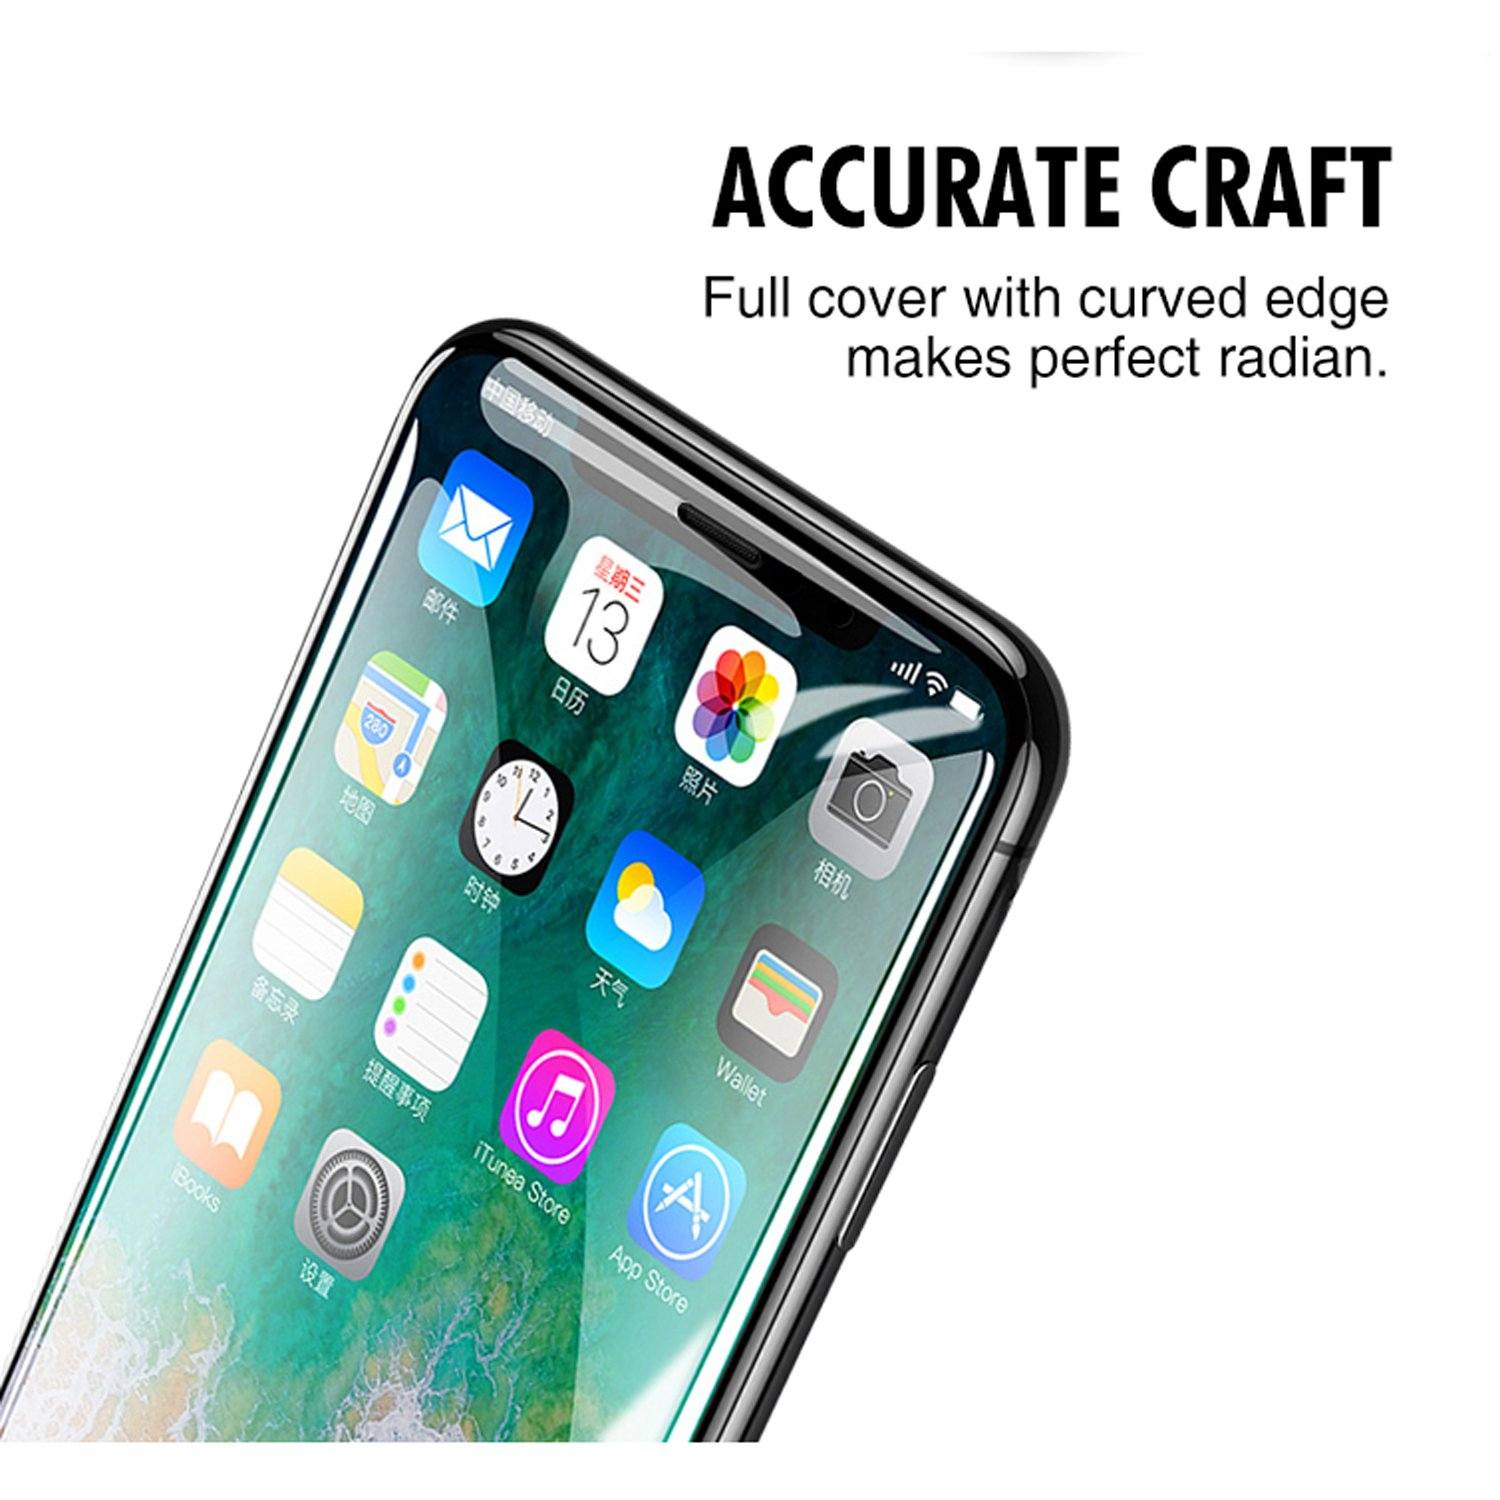 ZEELOT PureGlass 3D Full Adhesive Tempered Glass Screen Protector for Samsung Galaxy S9, Clear Tempered Glass ZEELOT 